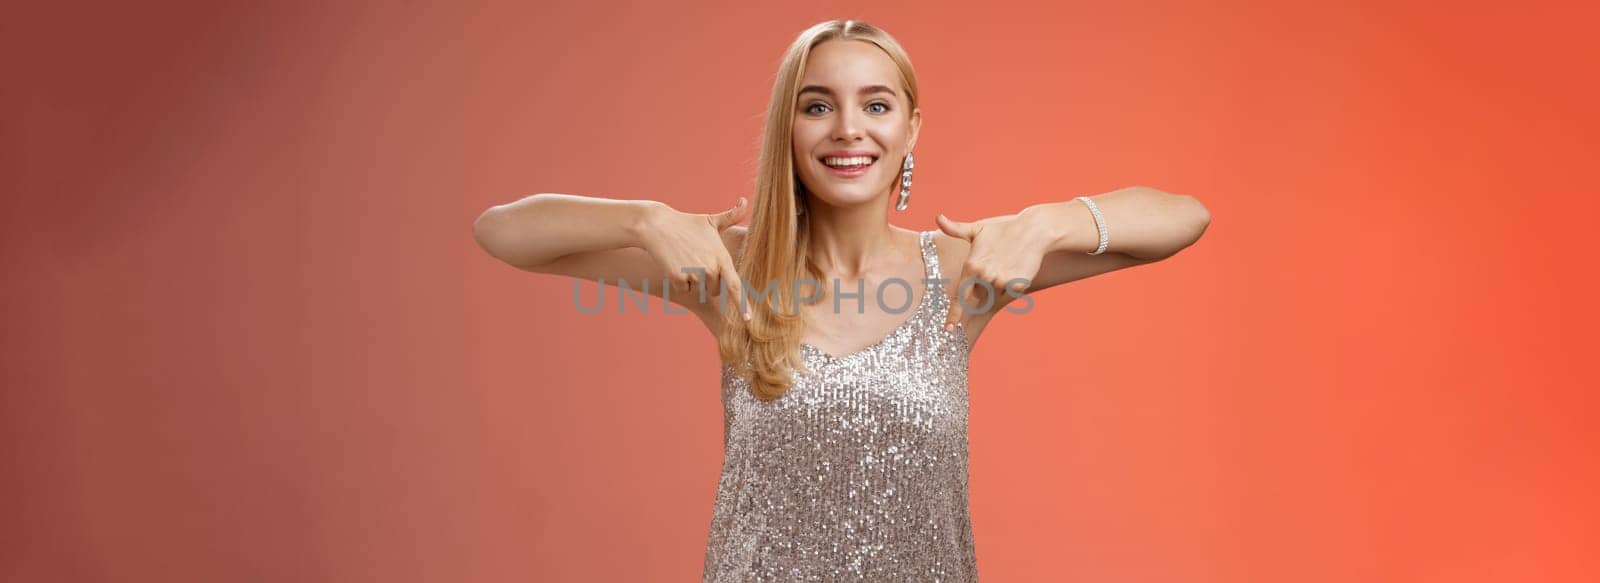 Lifestyle. Attractive glamour blond woman in silver glittering dress pointing down smiling excited showing awesome party place hang-out inviting try-out standing pleased red background enjoying perfect evening.